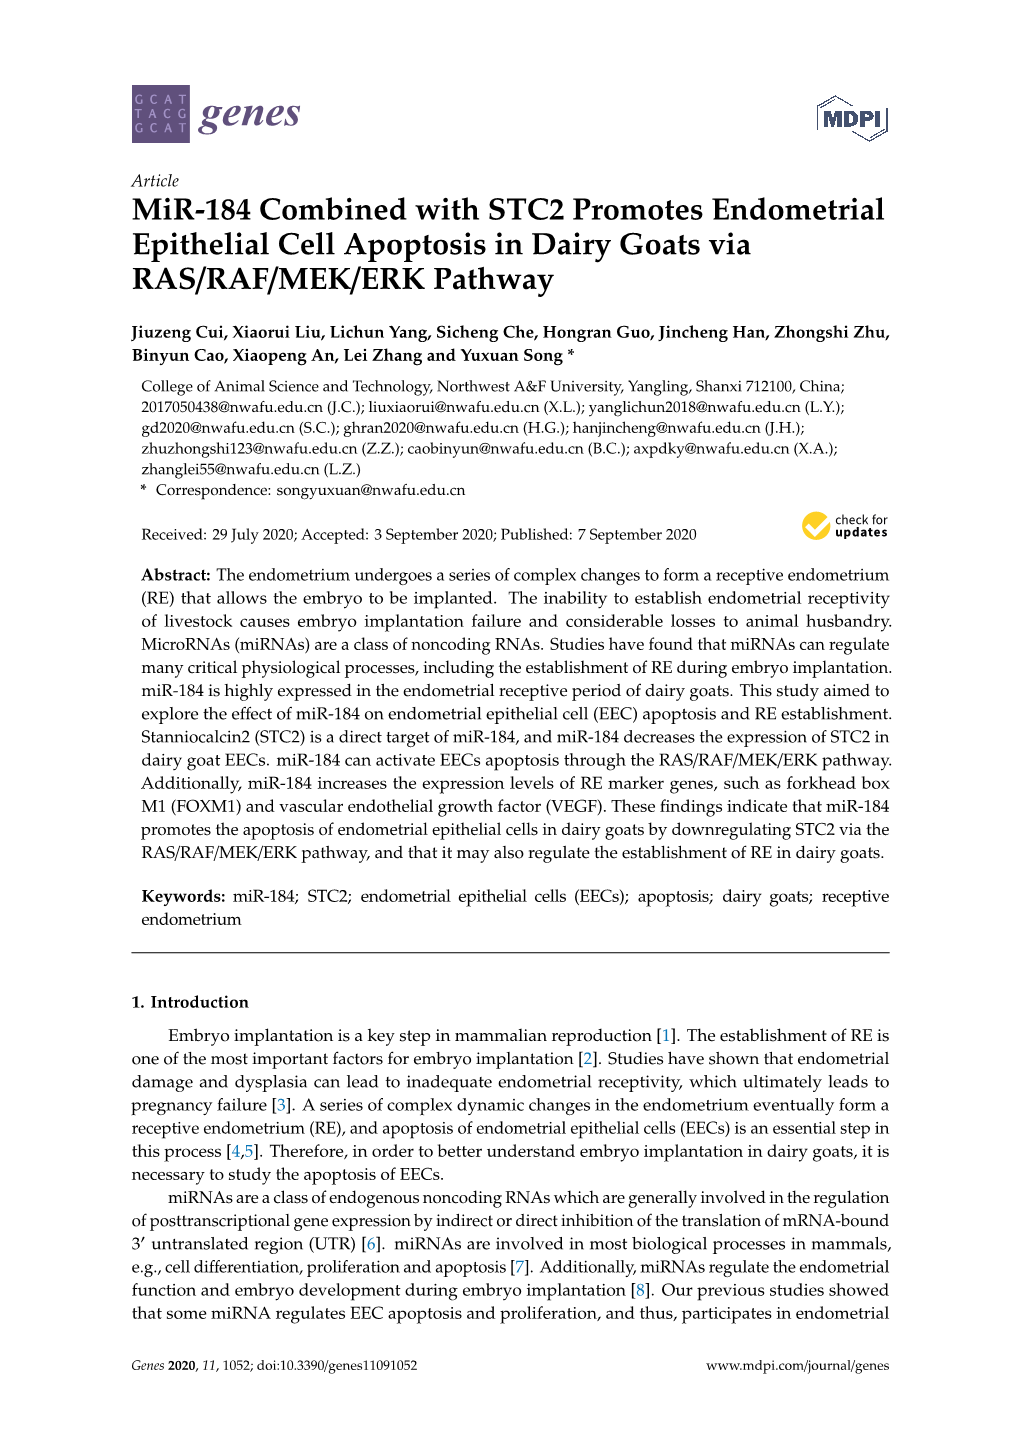 Mir-184 Combined with STC2 Promotes Endometrial Epithelial Cell Apoptosis in Dairy Goats Via RAS/RAF/MEK/ERK Pathway